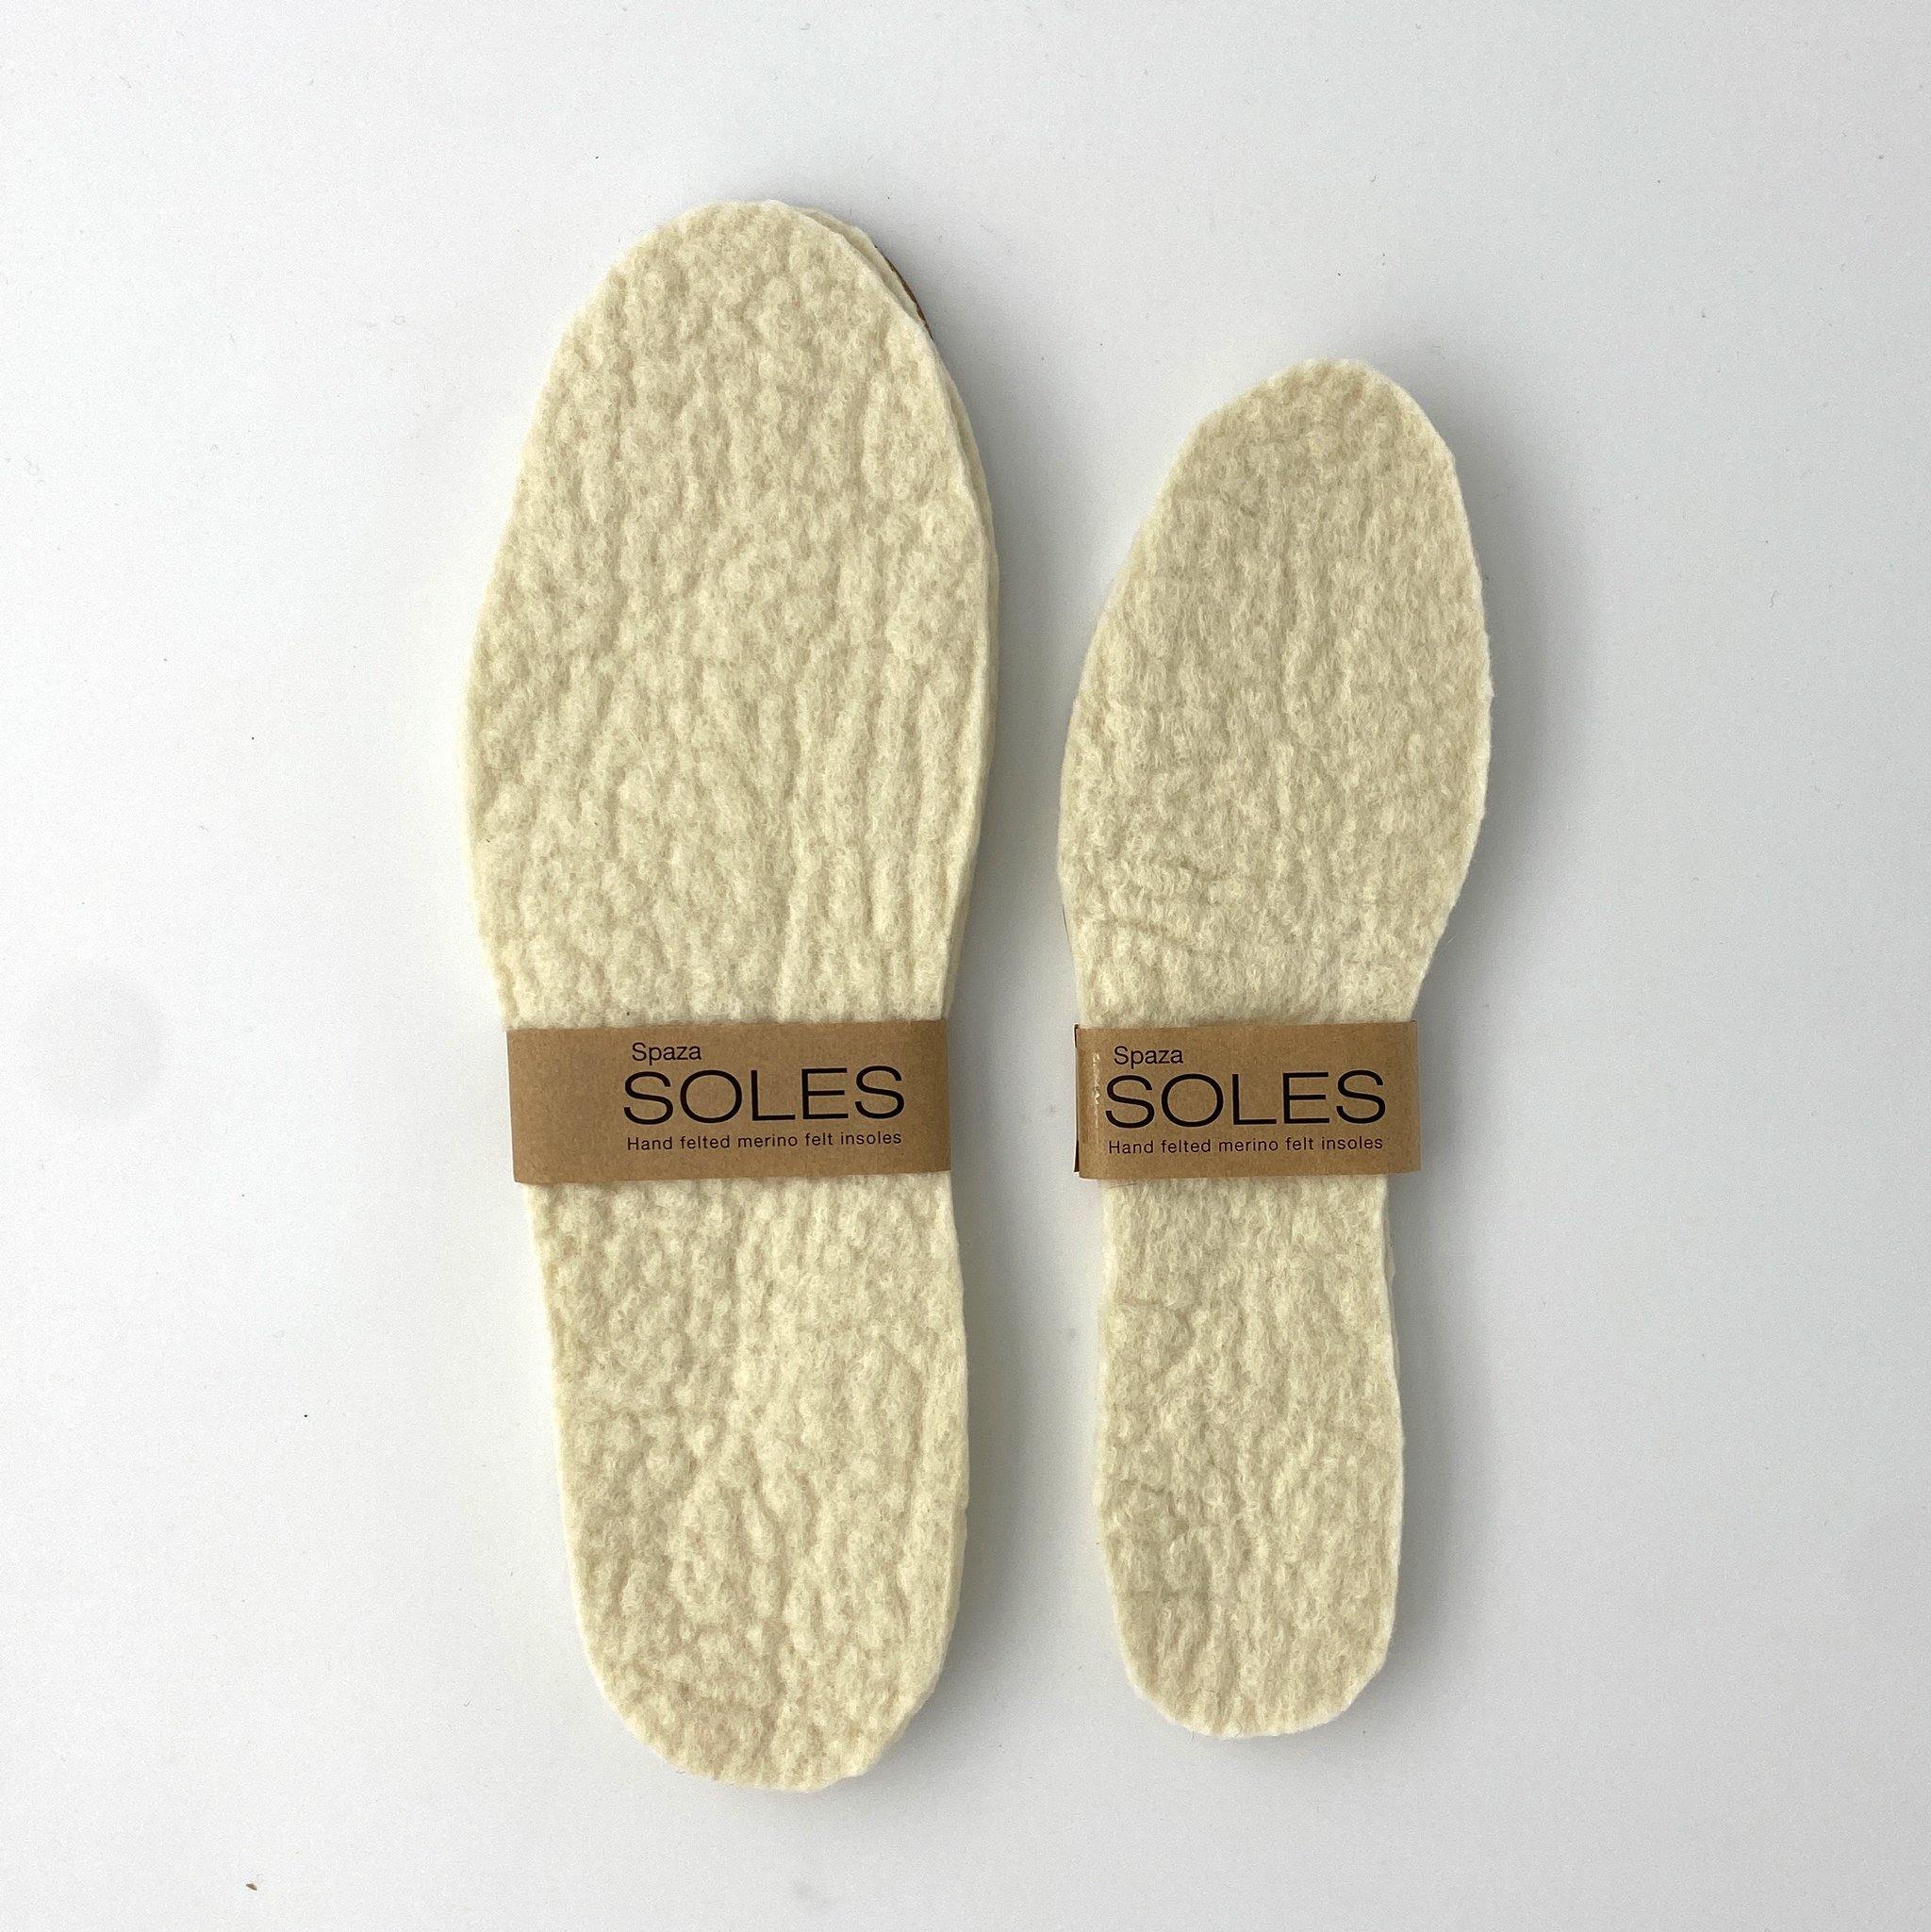 Felt Insoles: Merino Wool inserts for shoes, boots and slippers - spaza.store.com